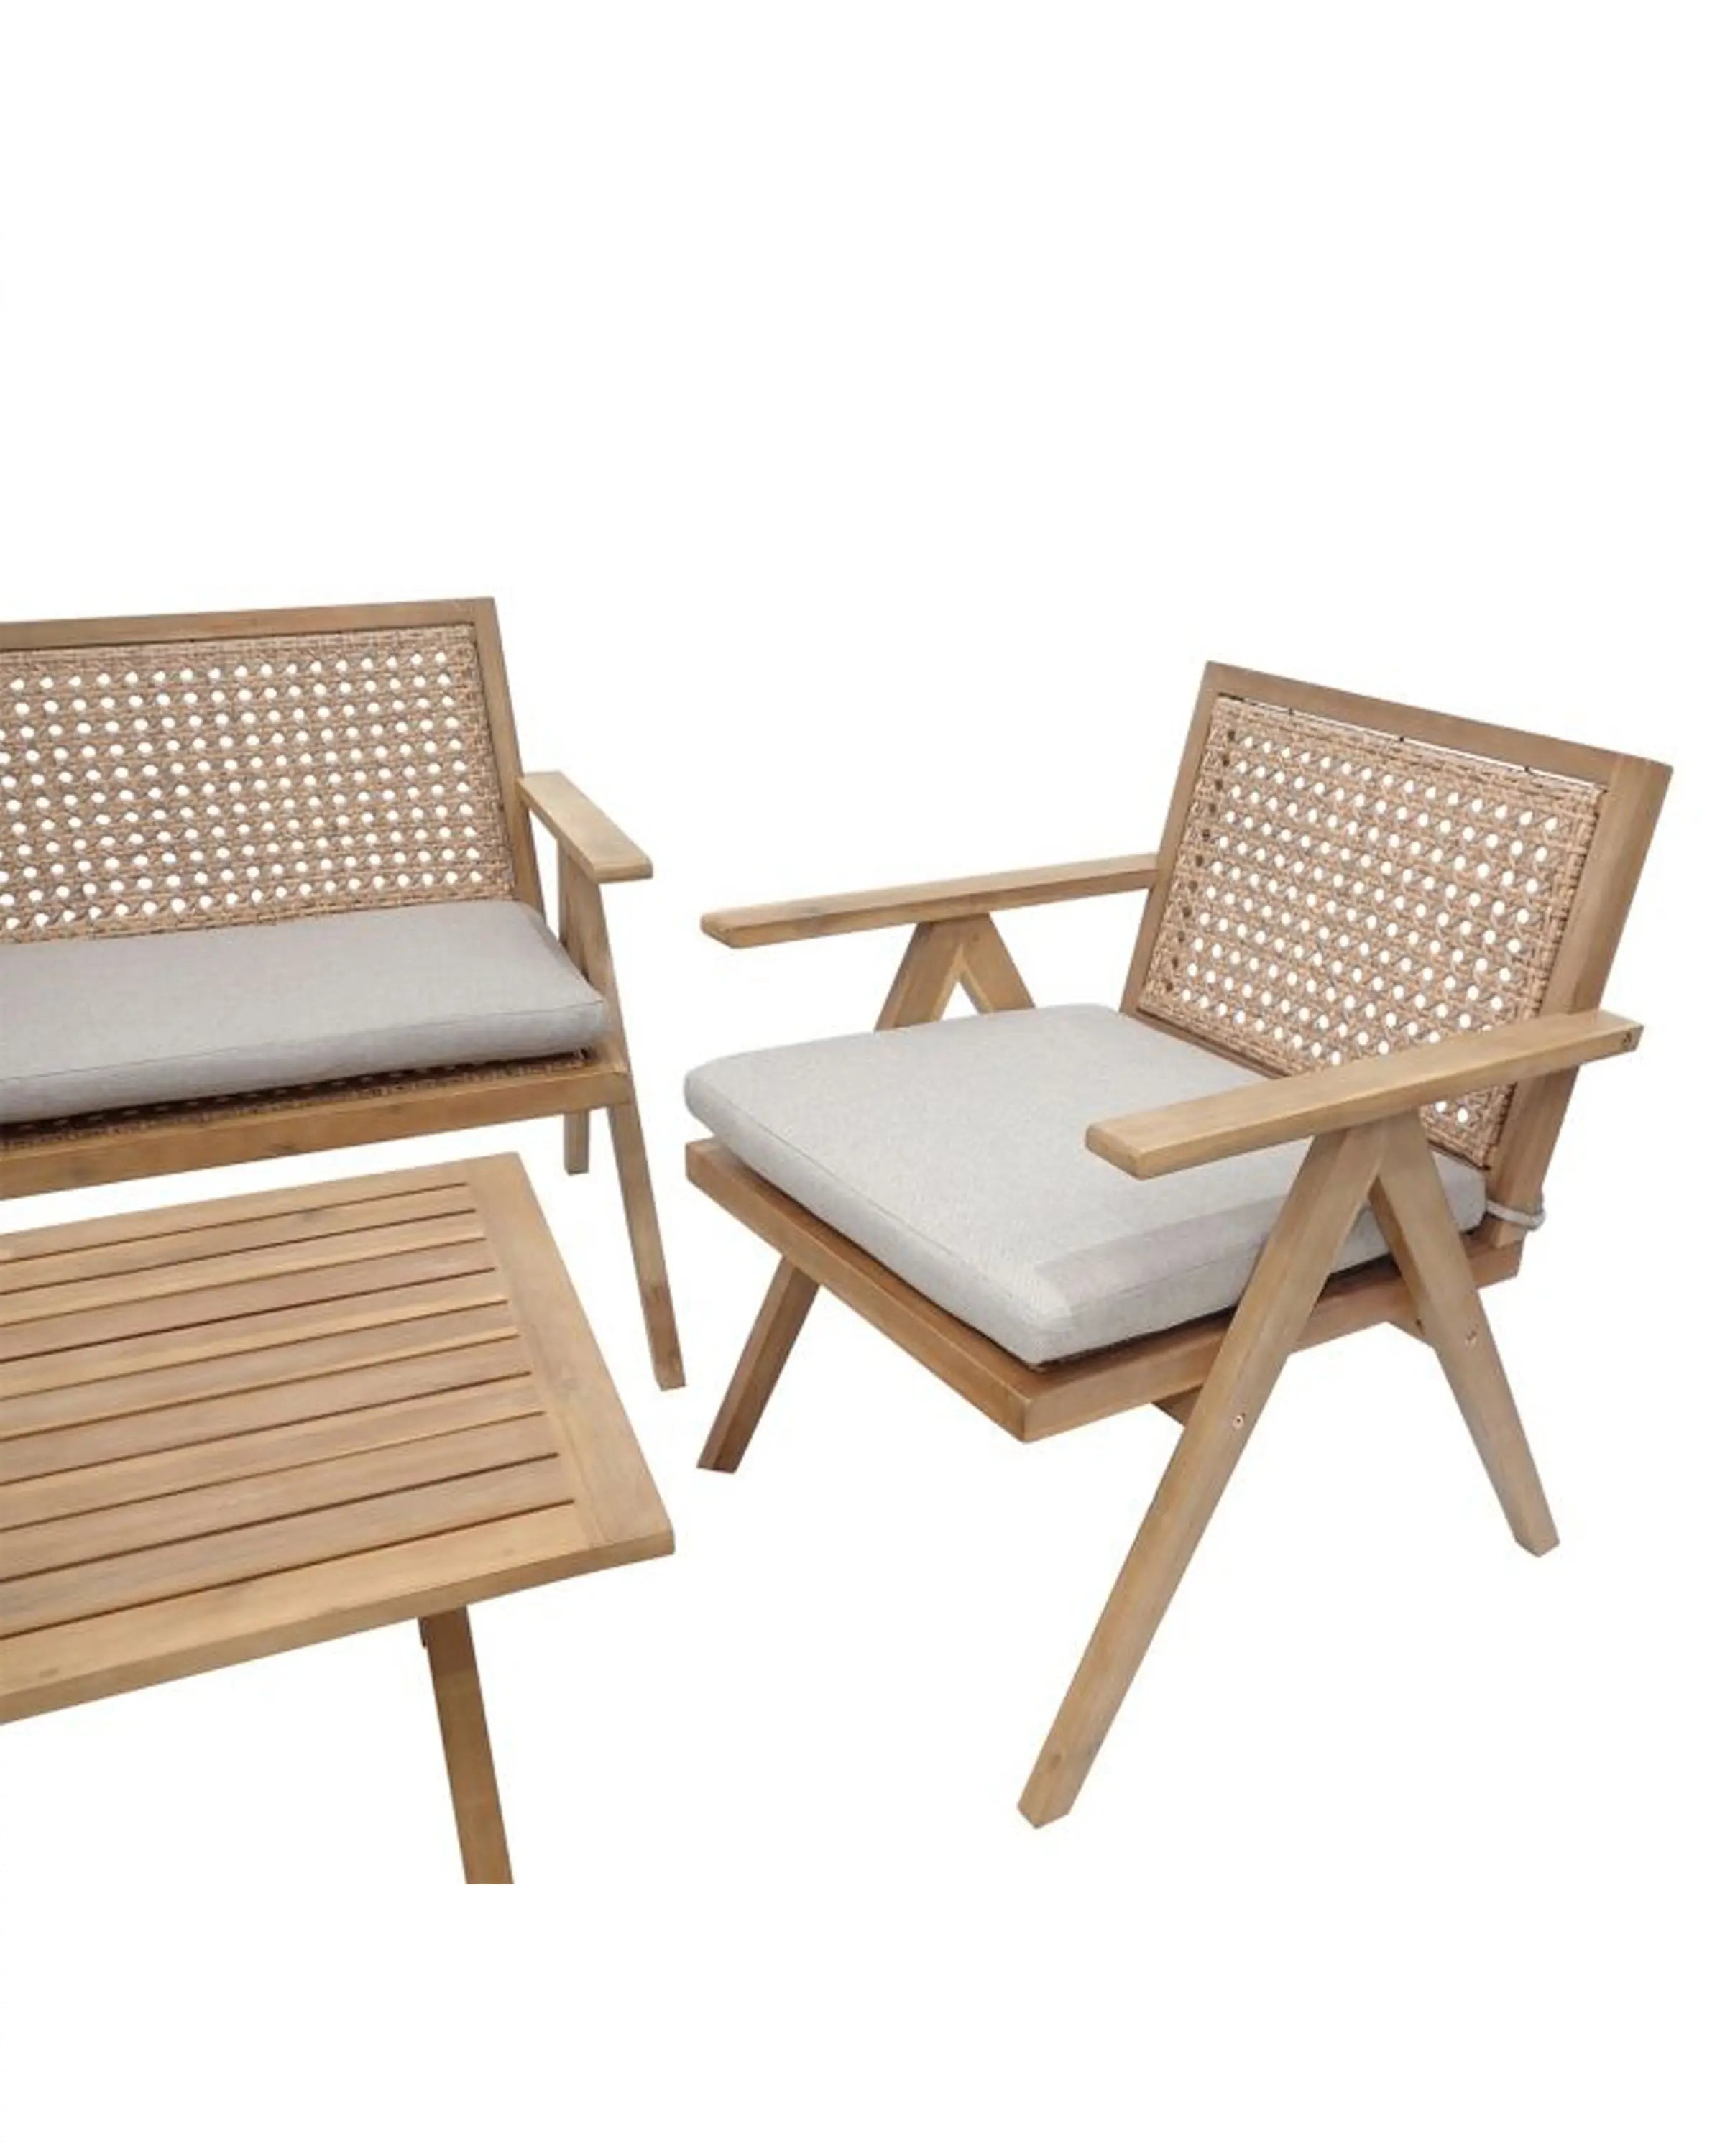 Olivia Lounge Sofa Chair | Outdoor Furniture | outdoor sofa and chair set ANGIE HOMES